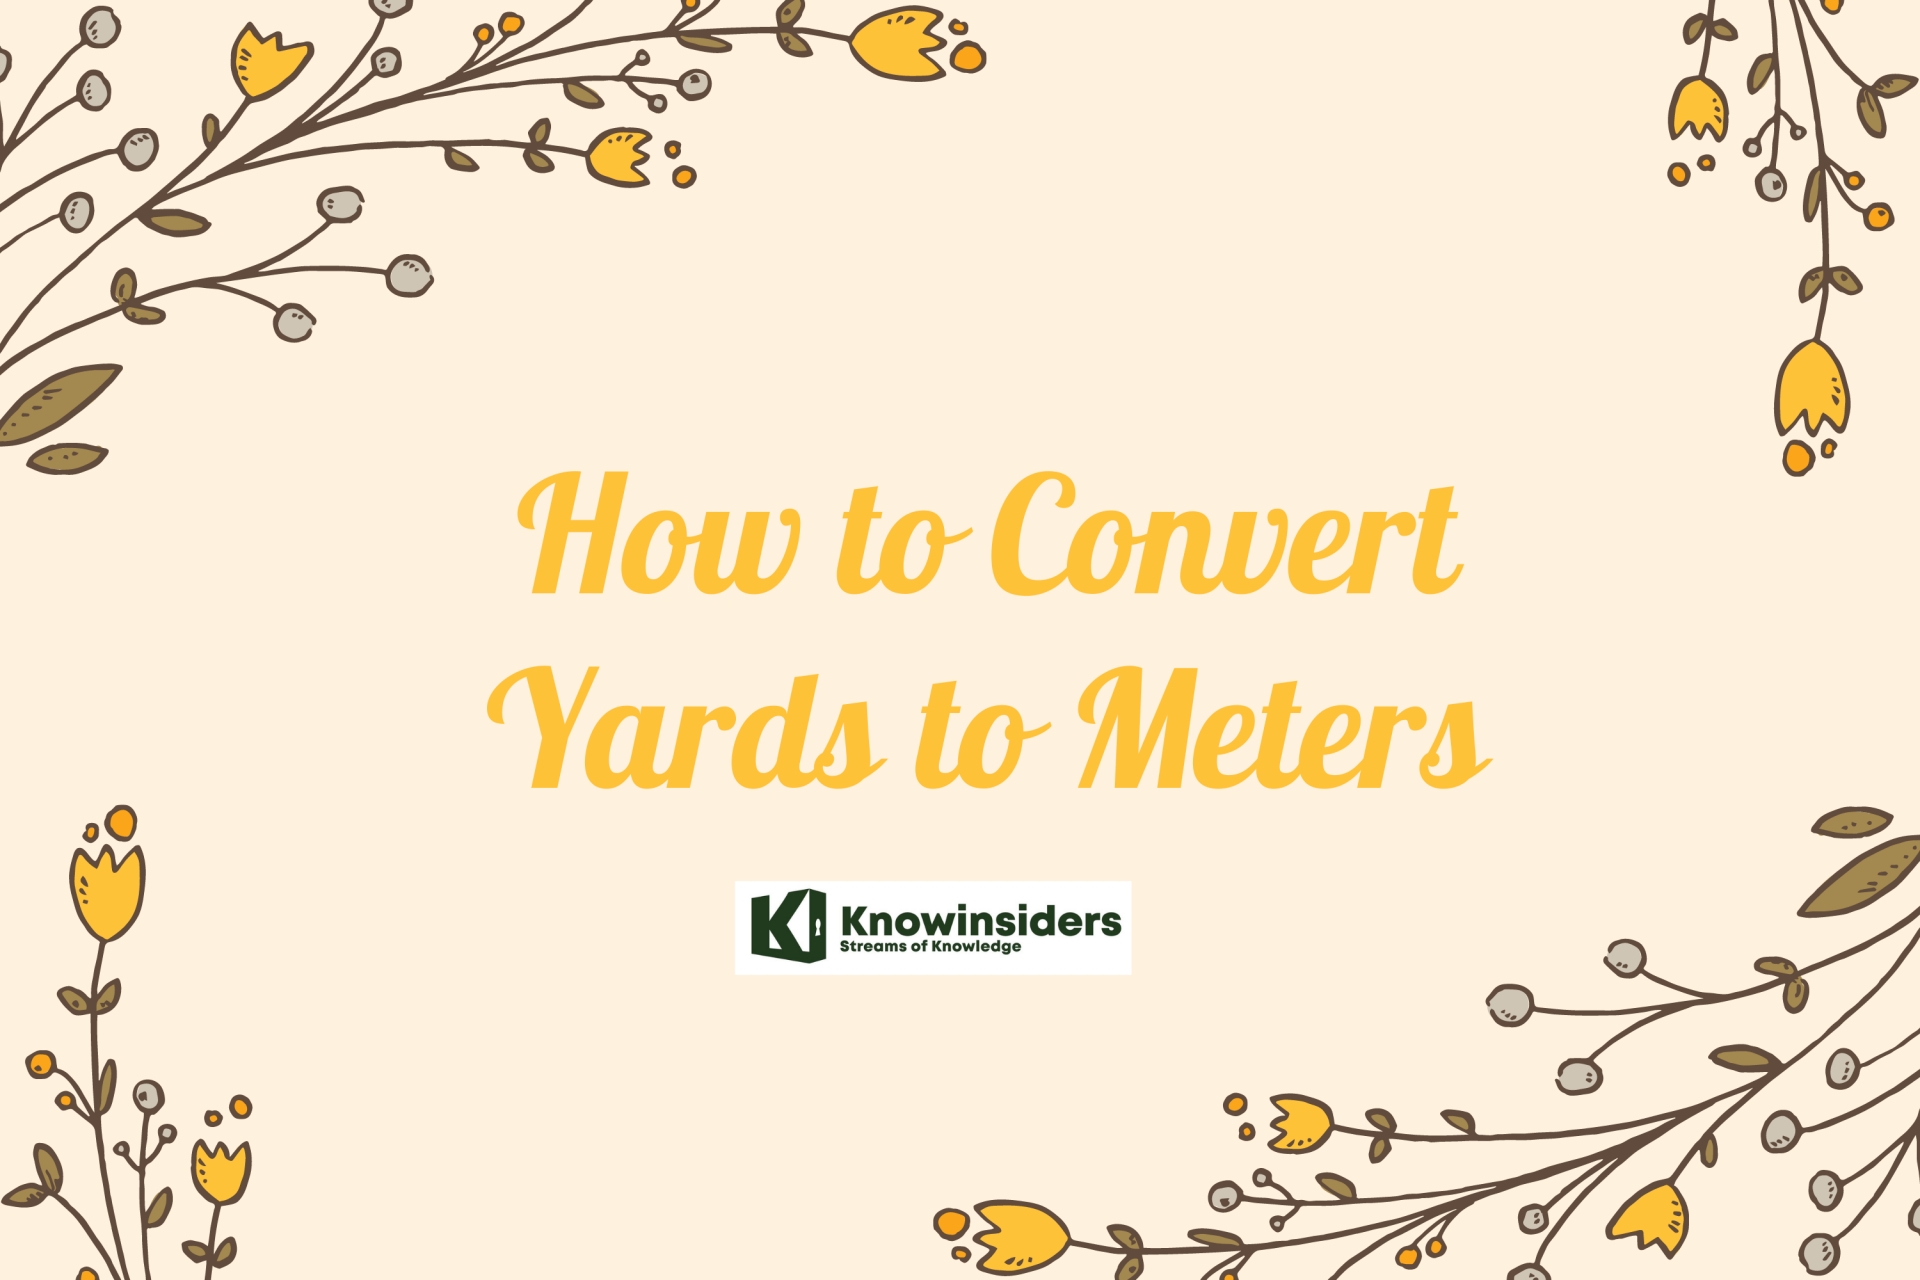 How to Convert Yards to Meters